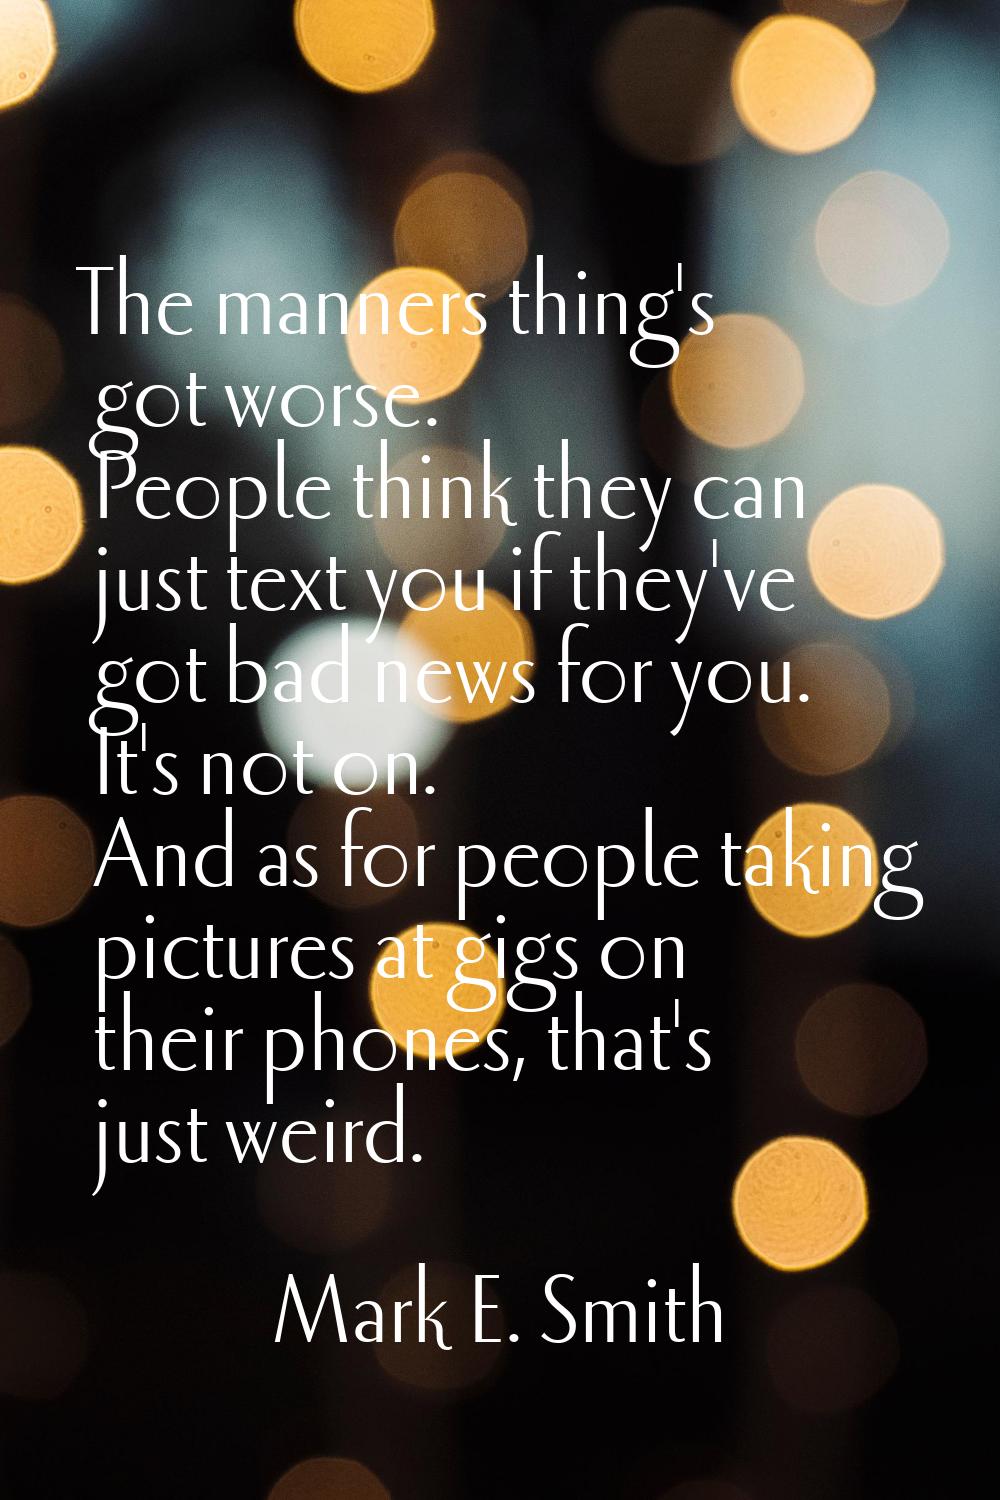 The manners thing's got worse. People think they can just text you if they've got bad news for you.